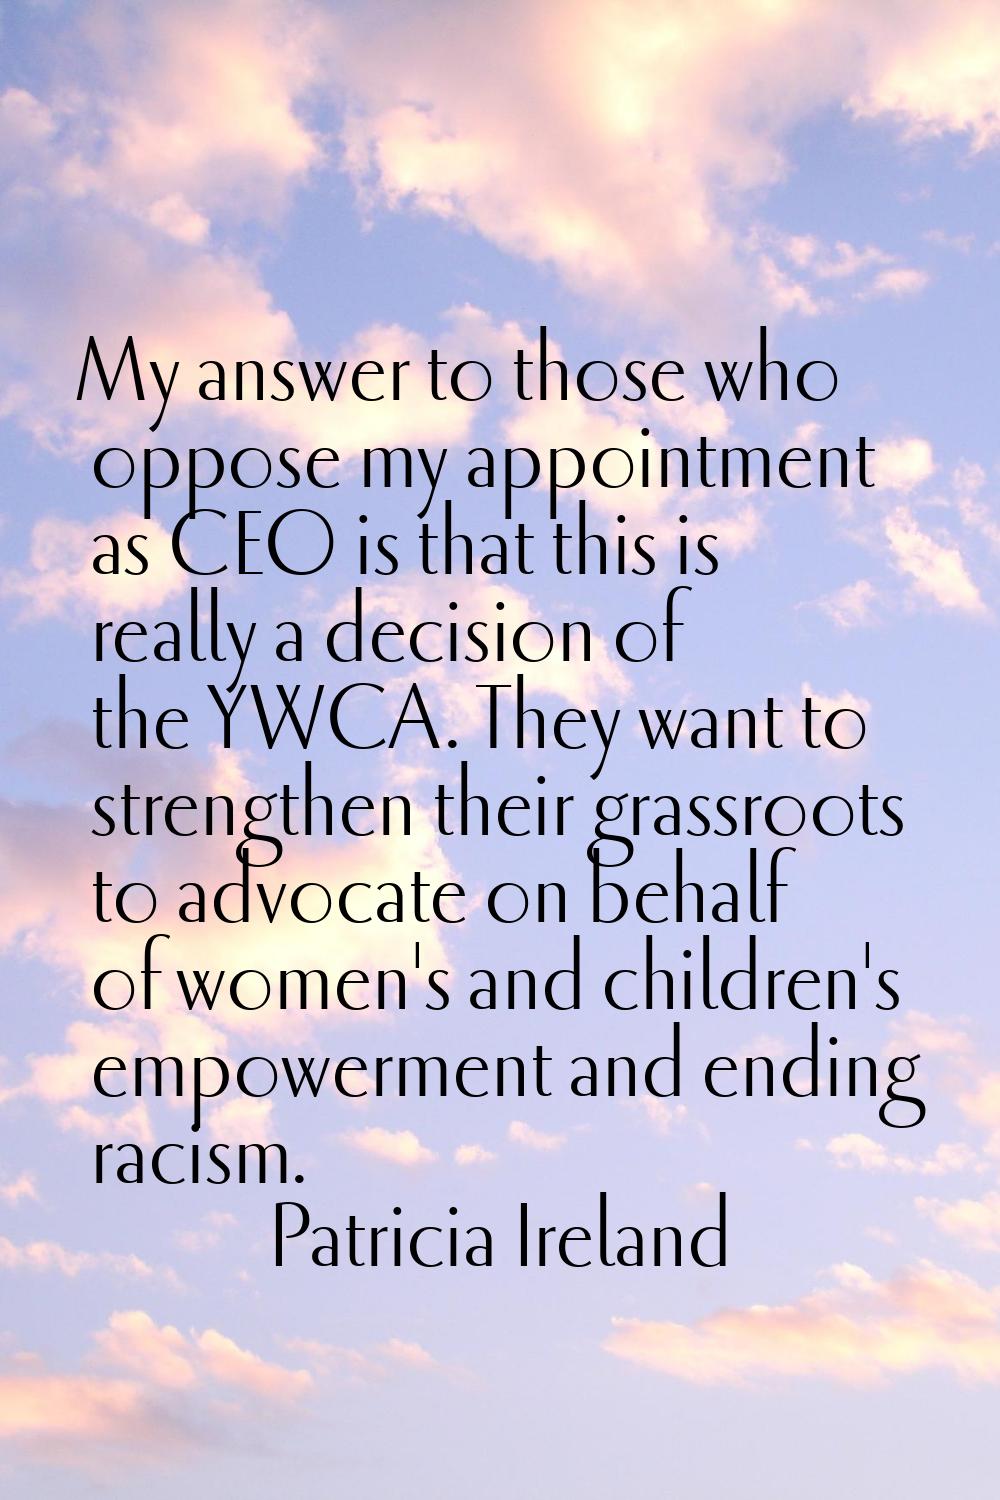 My answer to those who oppose my appointment as CEO is that this is really a decision of the YWCA. 